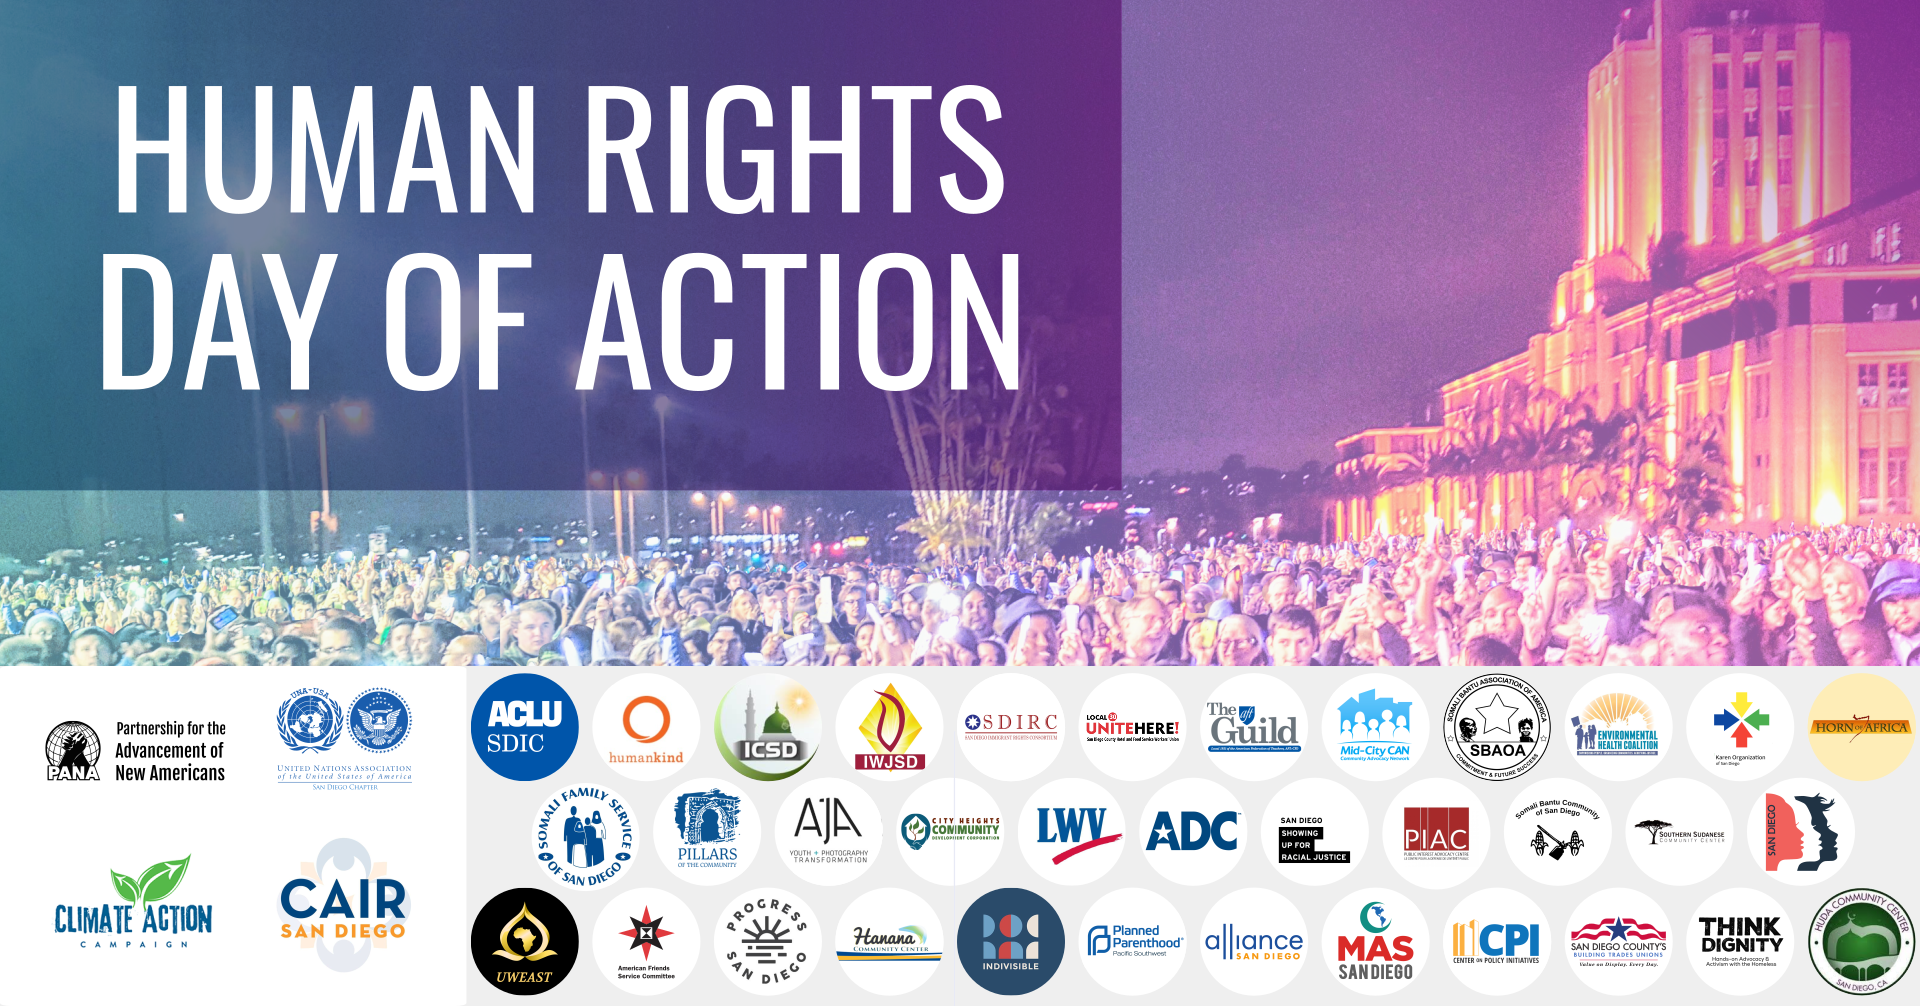 Sign-on: Human Rights Day of Action 2017